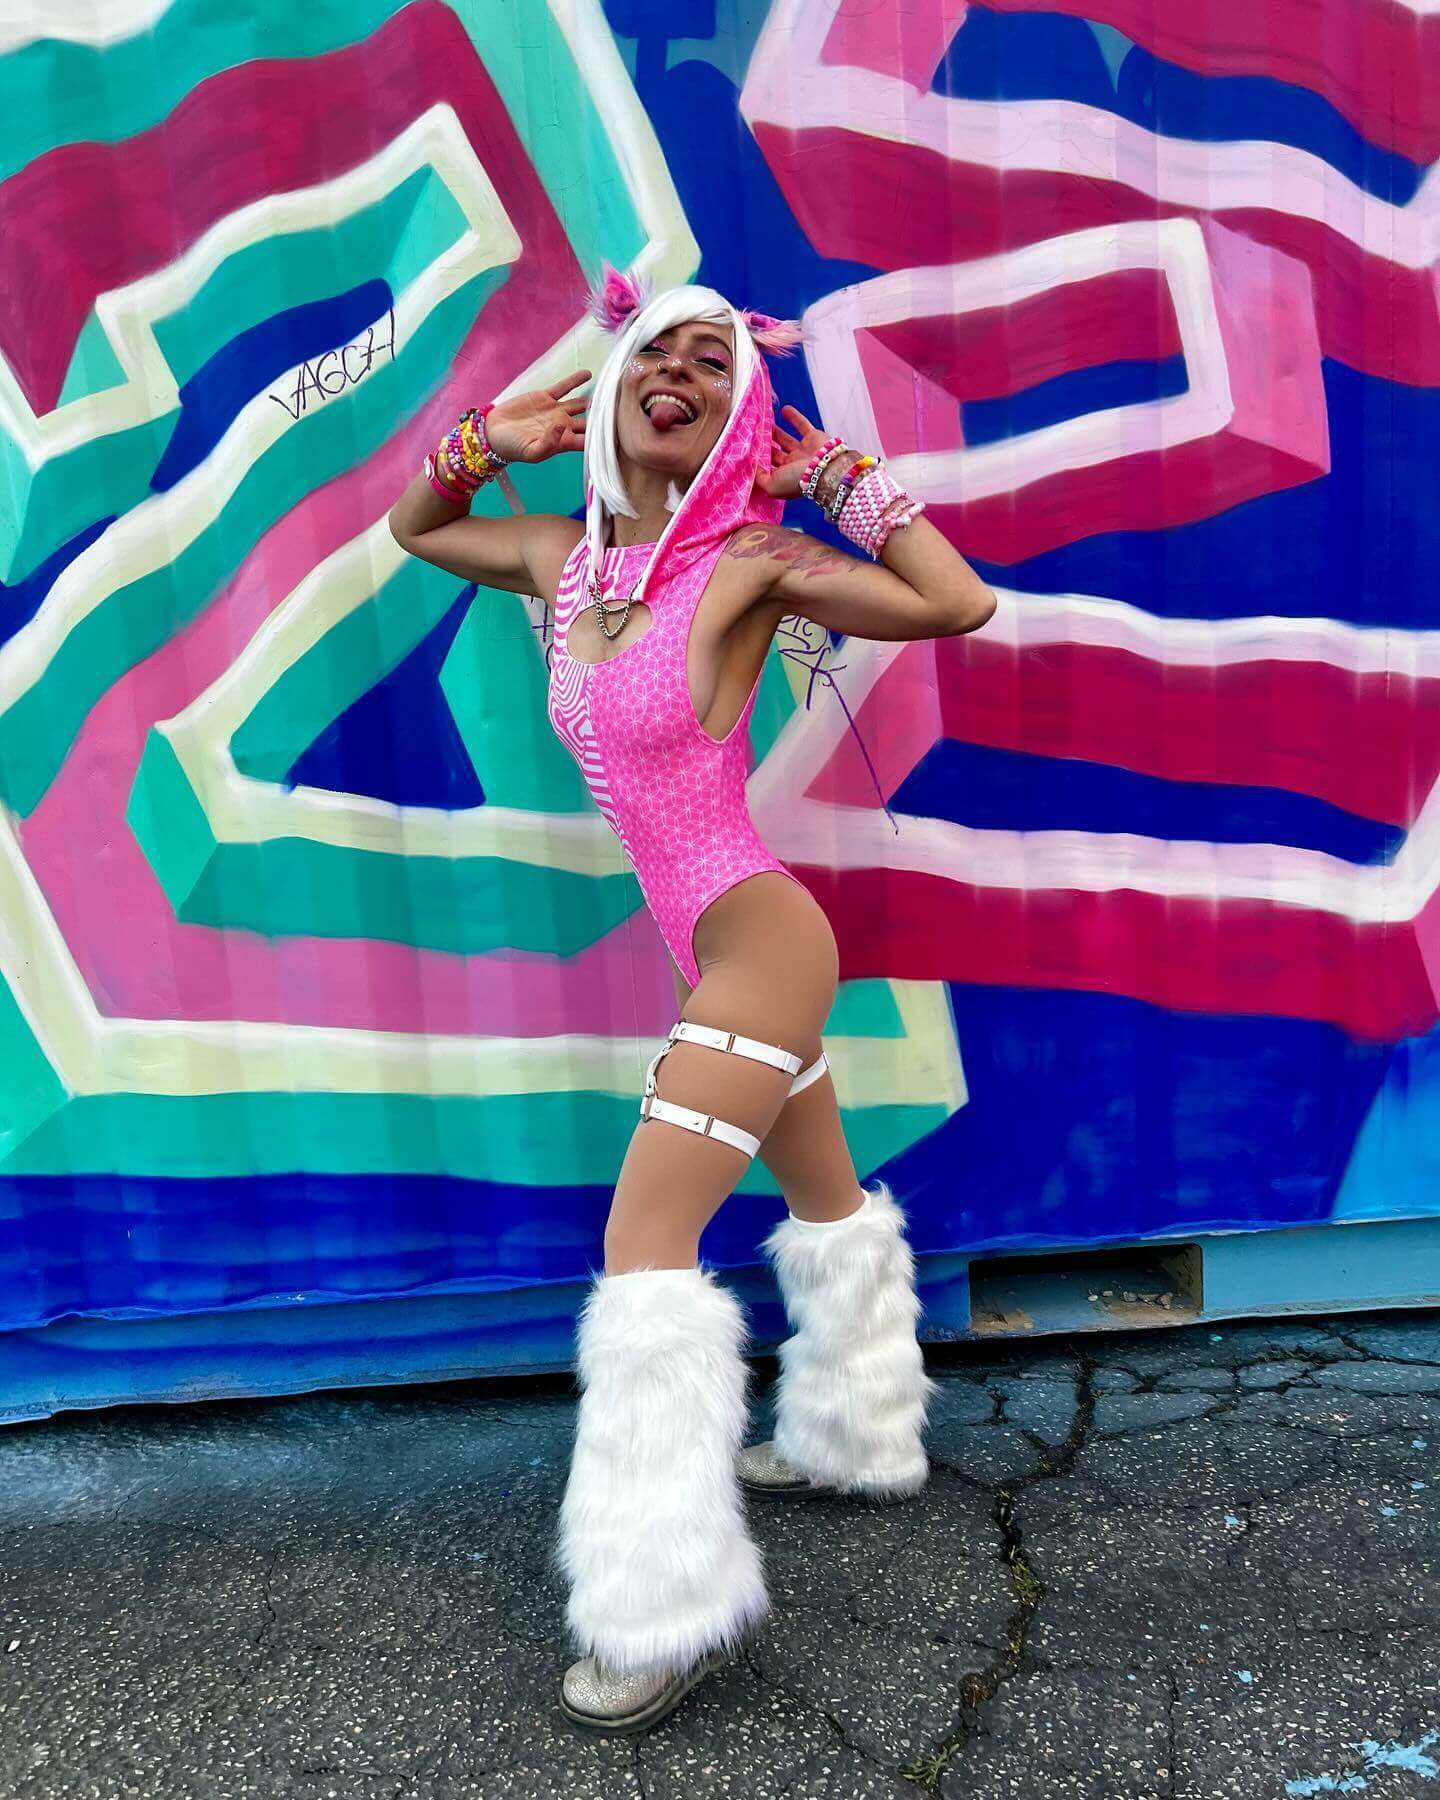 A woman playfully poses in front of a mural, wearing a pink and white bodysuit with a matching hood, and fluffy white boots.